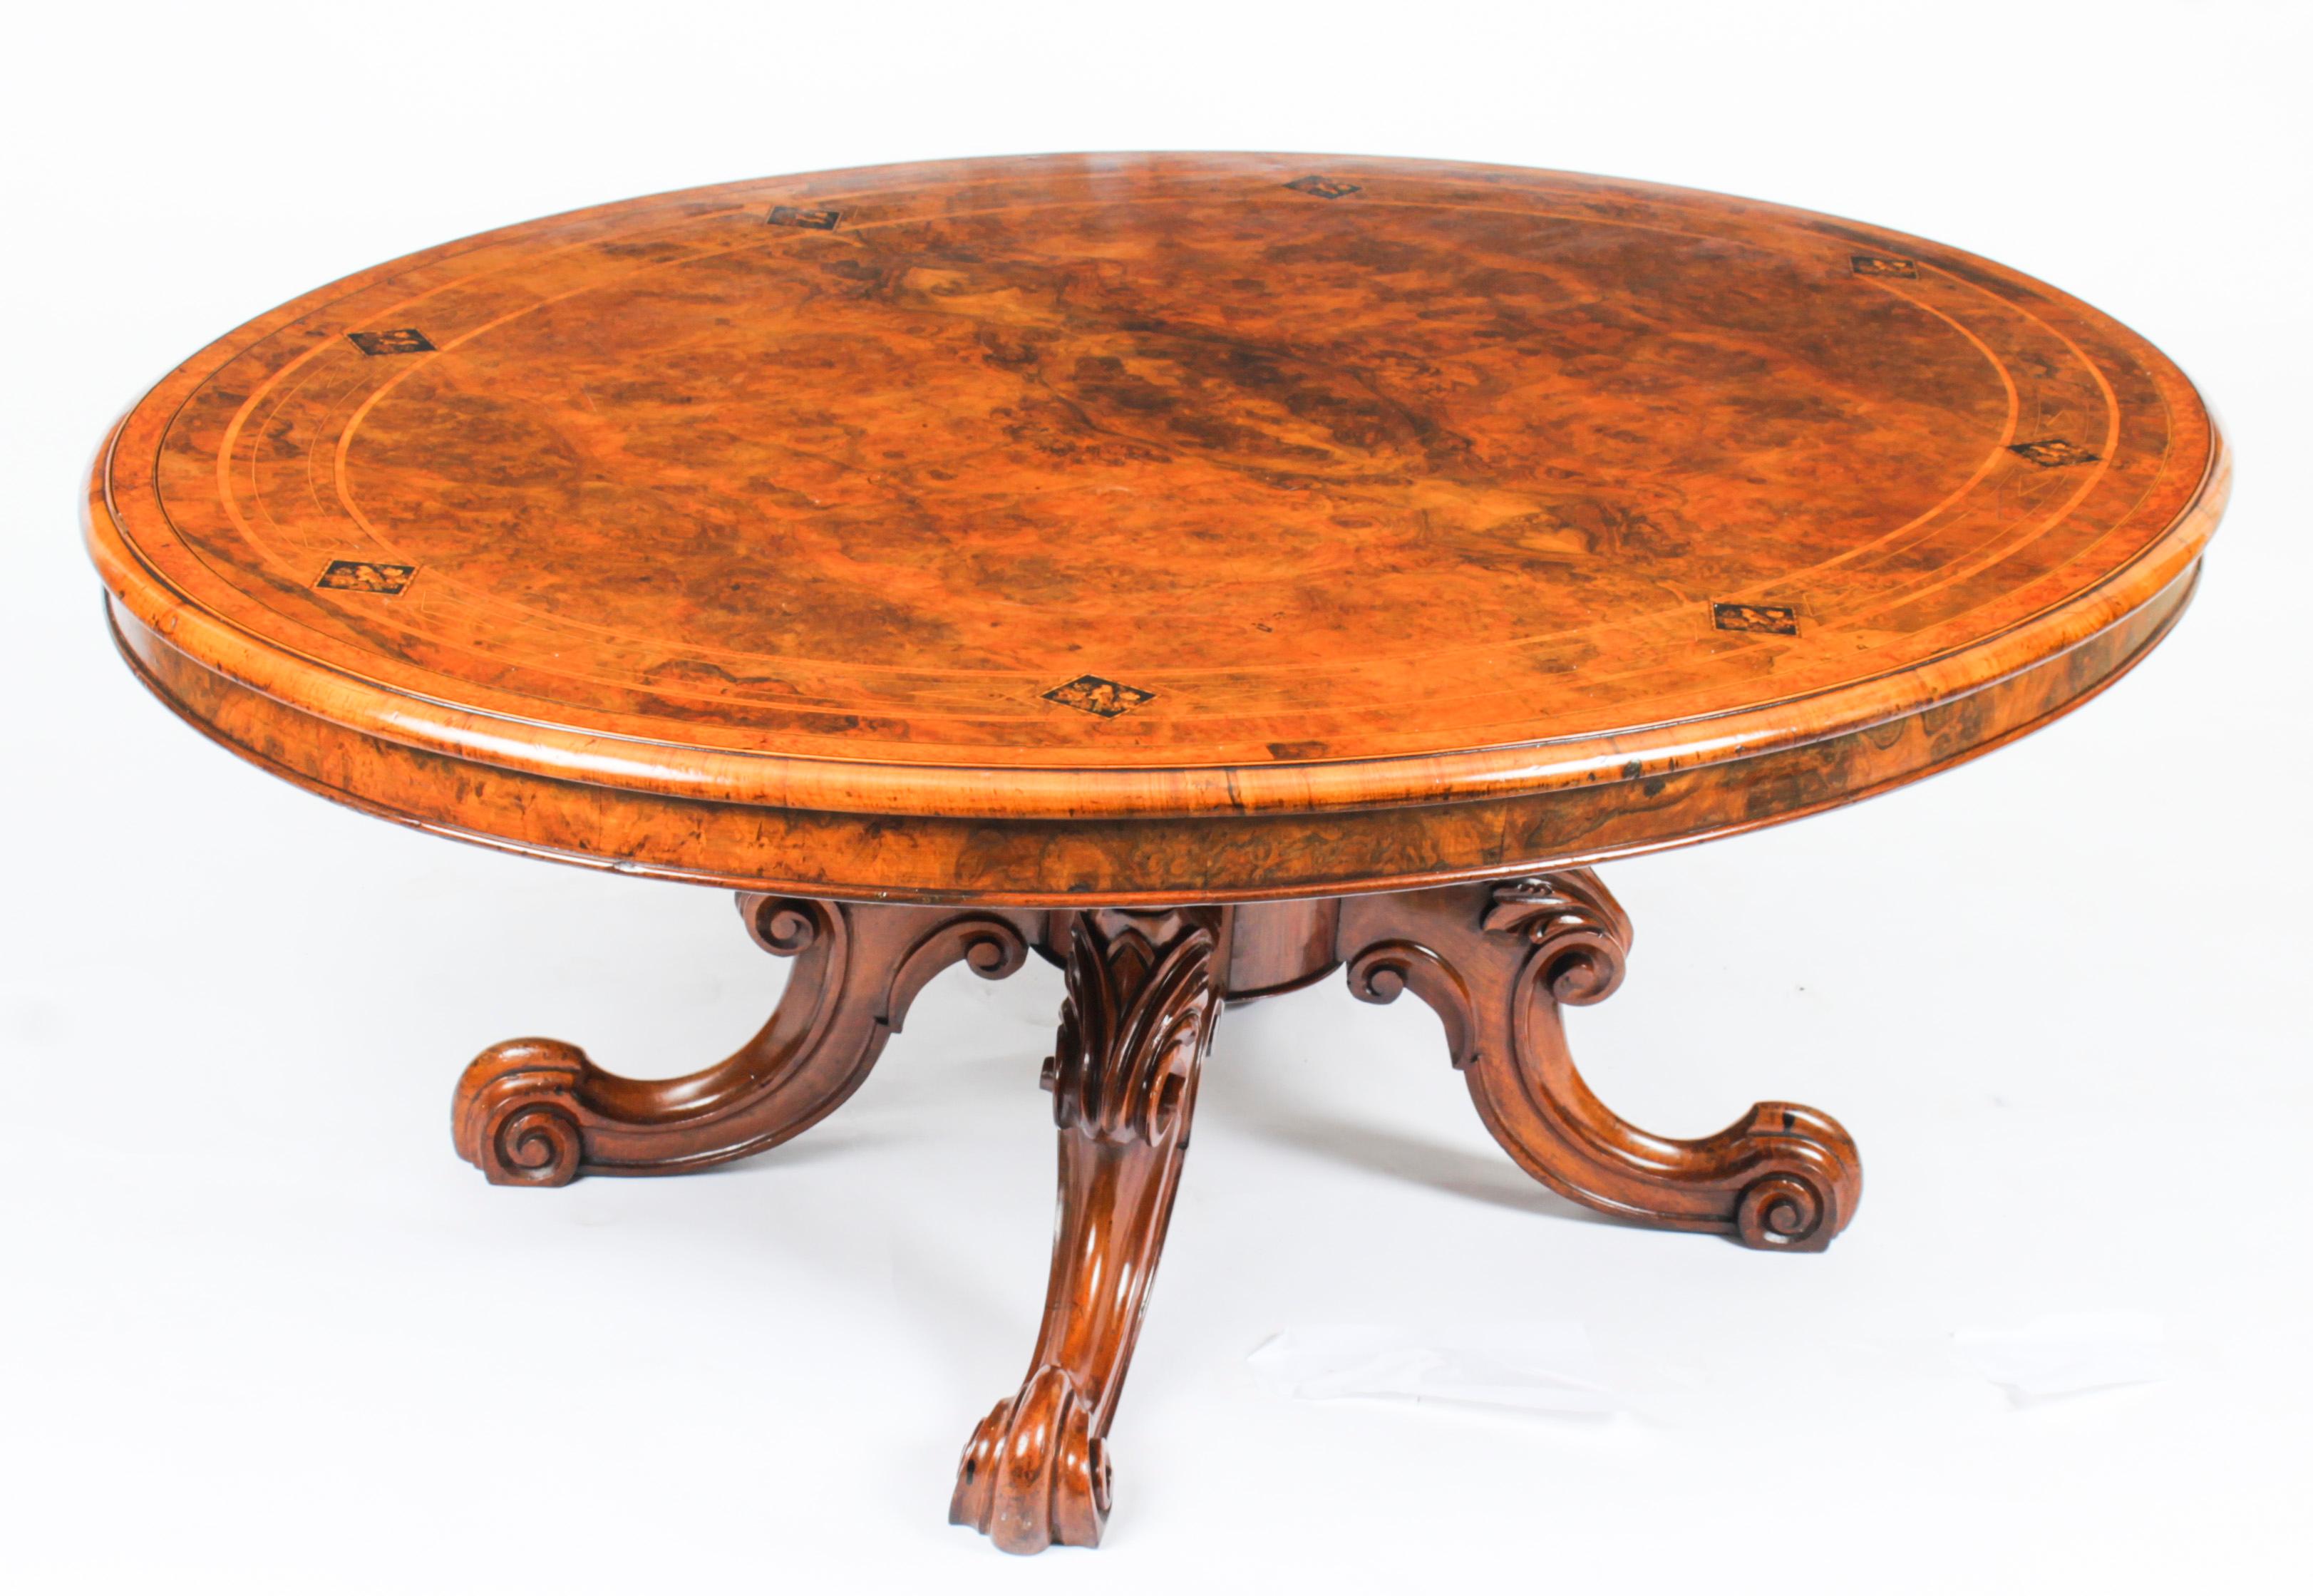 This is a superb Victorian burr walnut coffee table, circa 1860 in date.
 
The table top is oval in shape and features wonderful burr walnut with superb amboyna banding and tunbrigeware inlaid panels. It is raised on a base that is hand carved